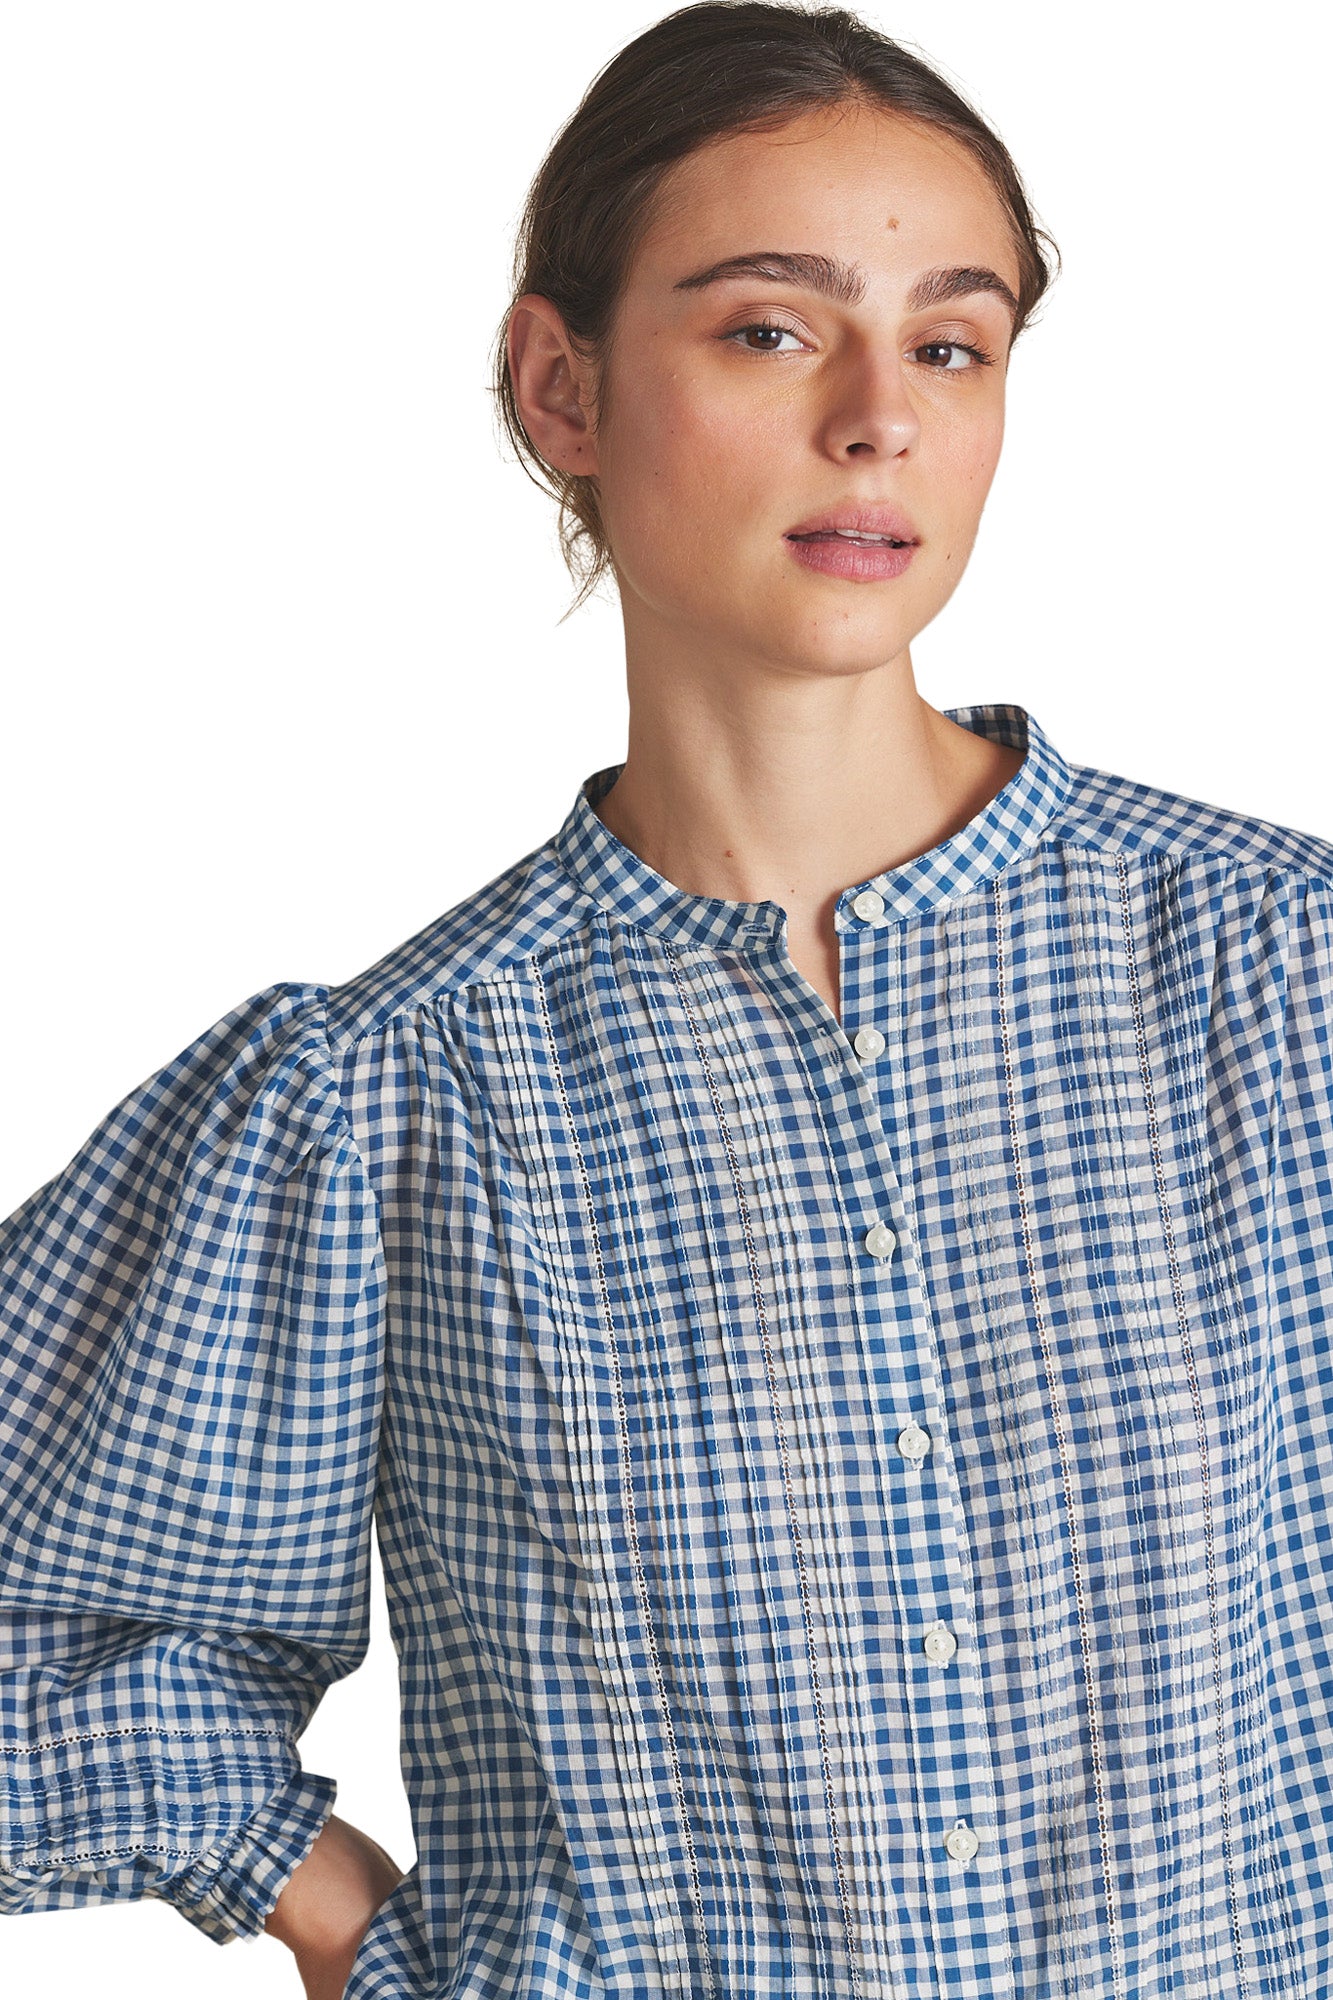 Trovata Birds of Paradis Maeve Blouse in Sailor Gingham